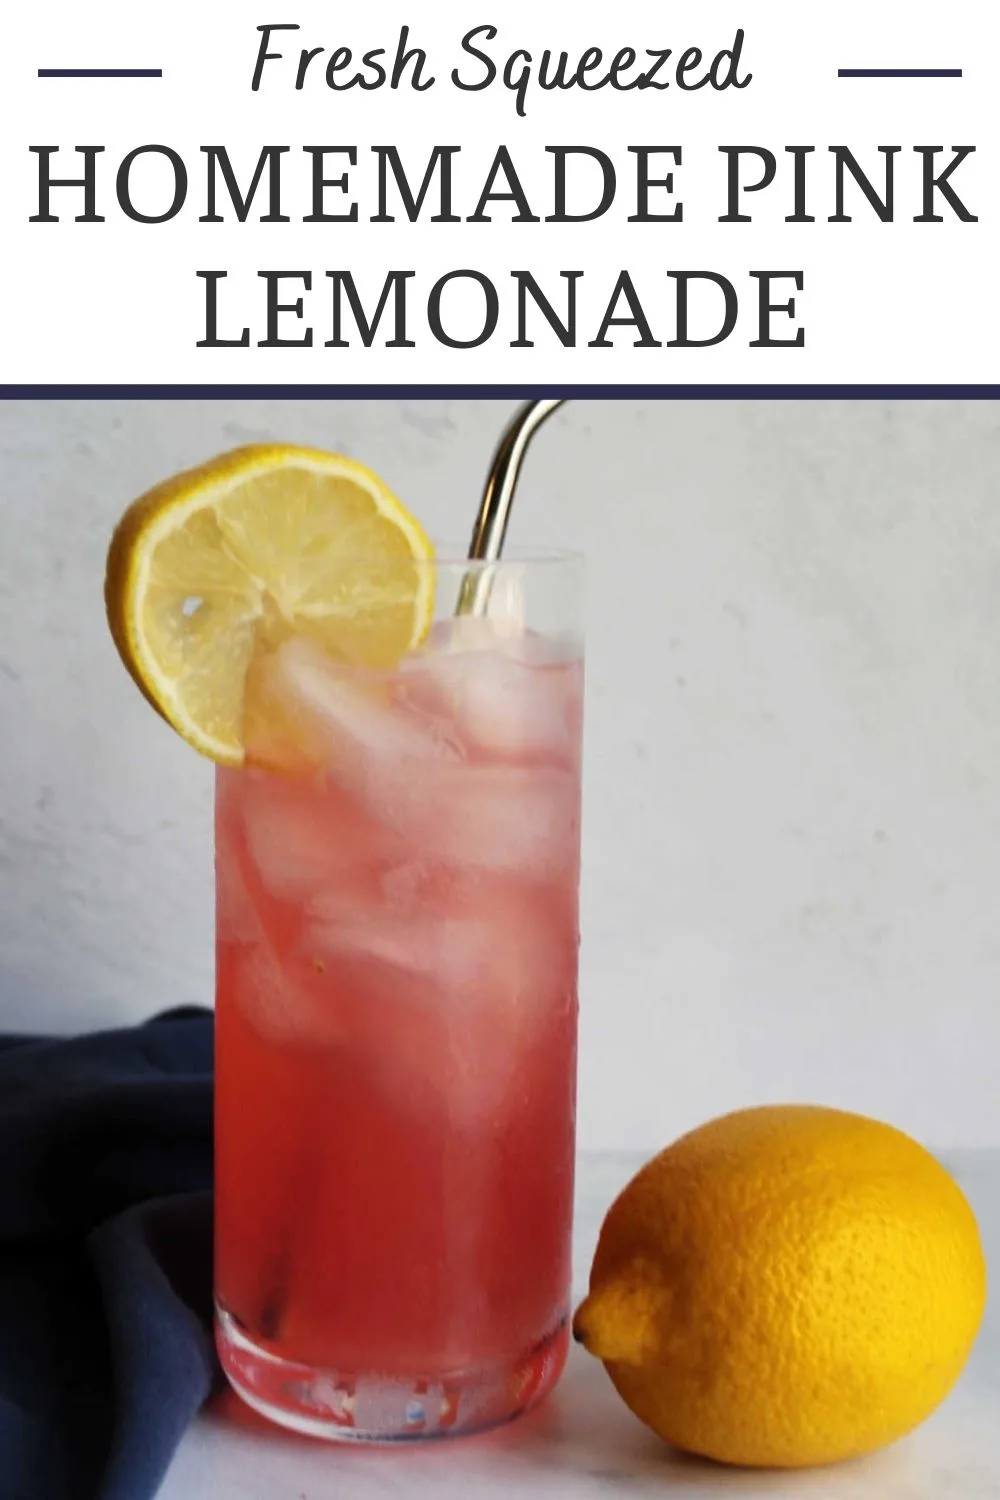 Homemade pink lemonade is the epitome of refreshing summer beverages. It has the perfect combination of sweet and tart and only takes a few ingredients to make.